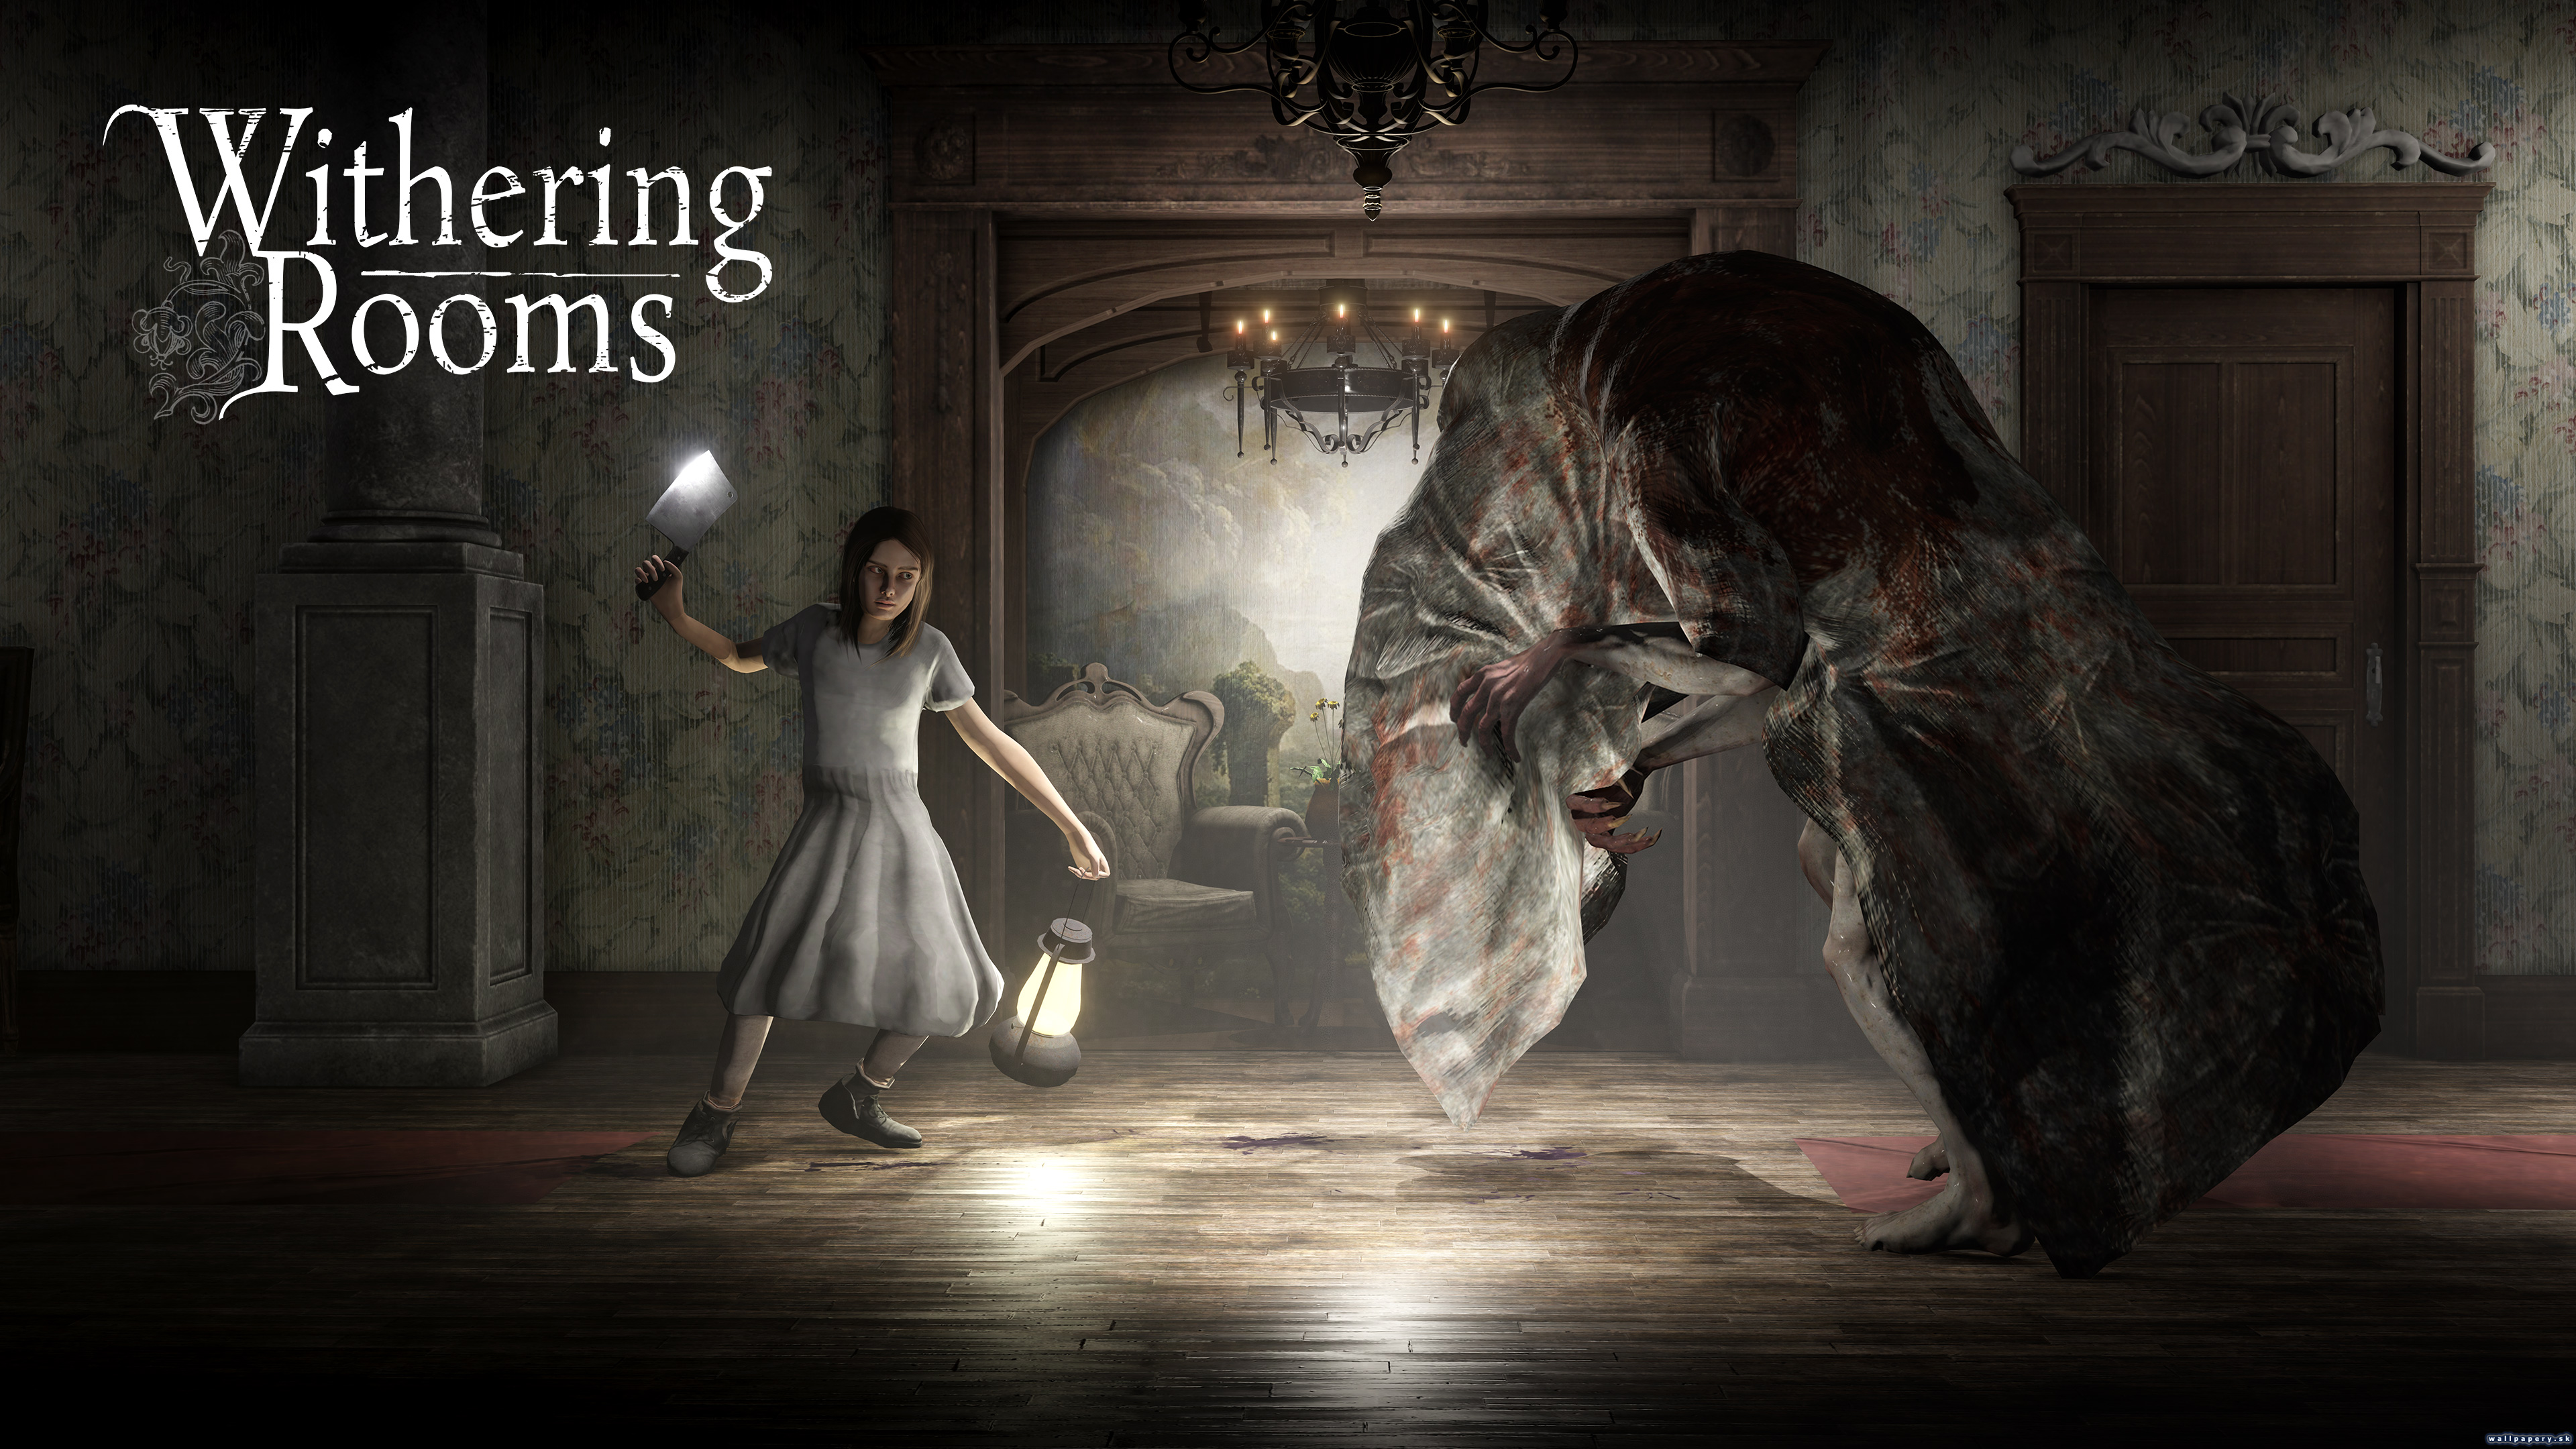 Withering Rooms - wallpaper 1